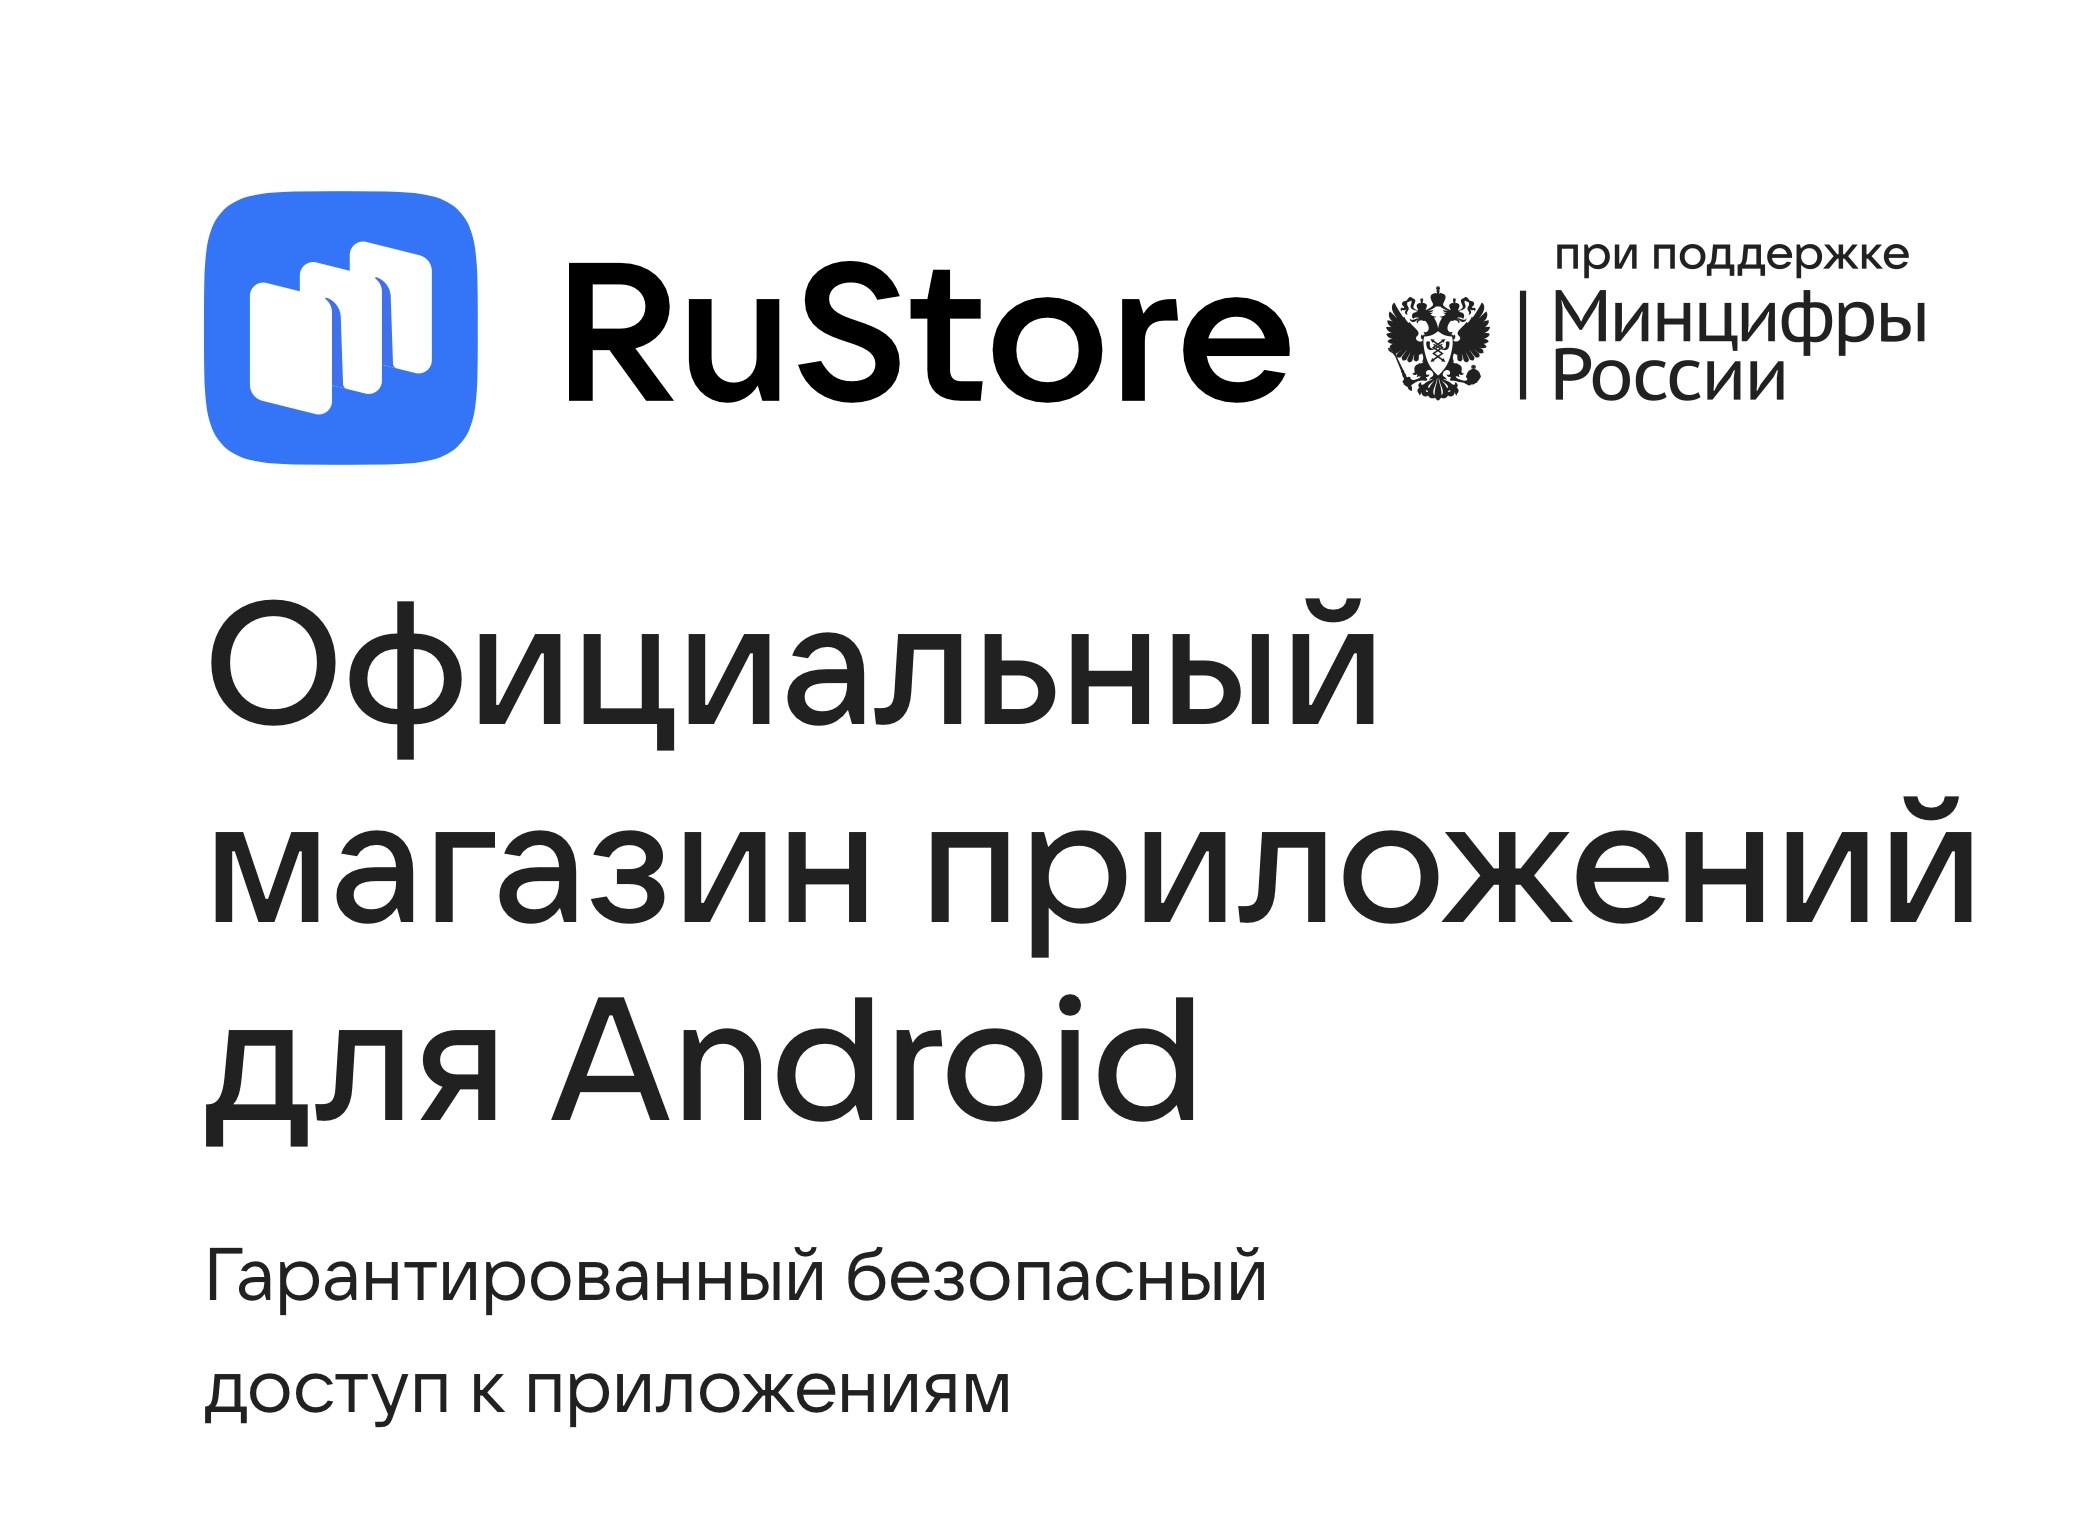      RuStore  iPhone.      Android?